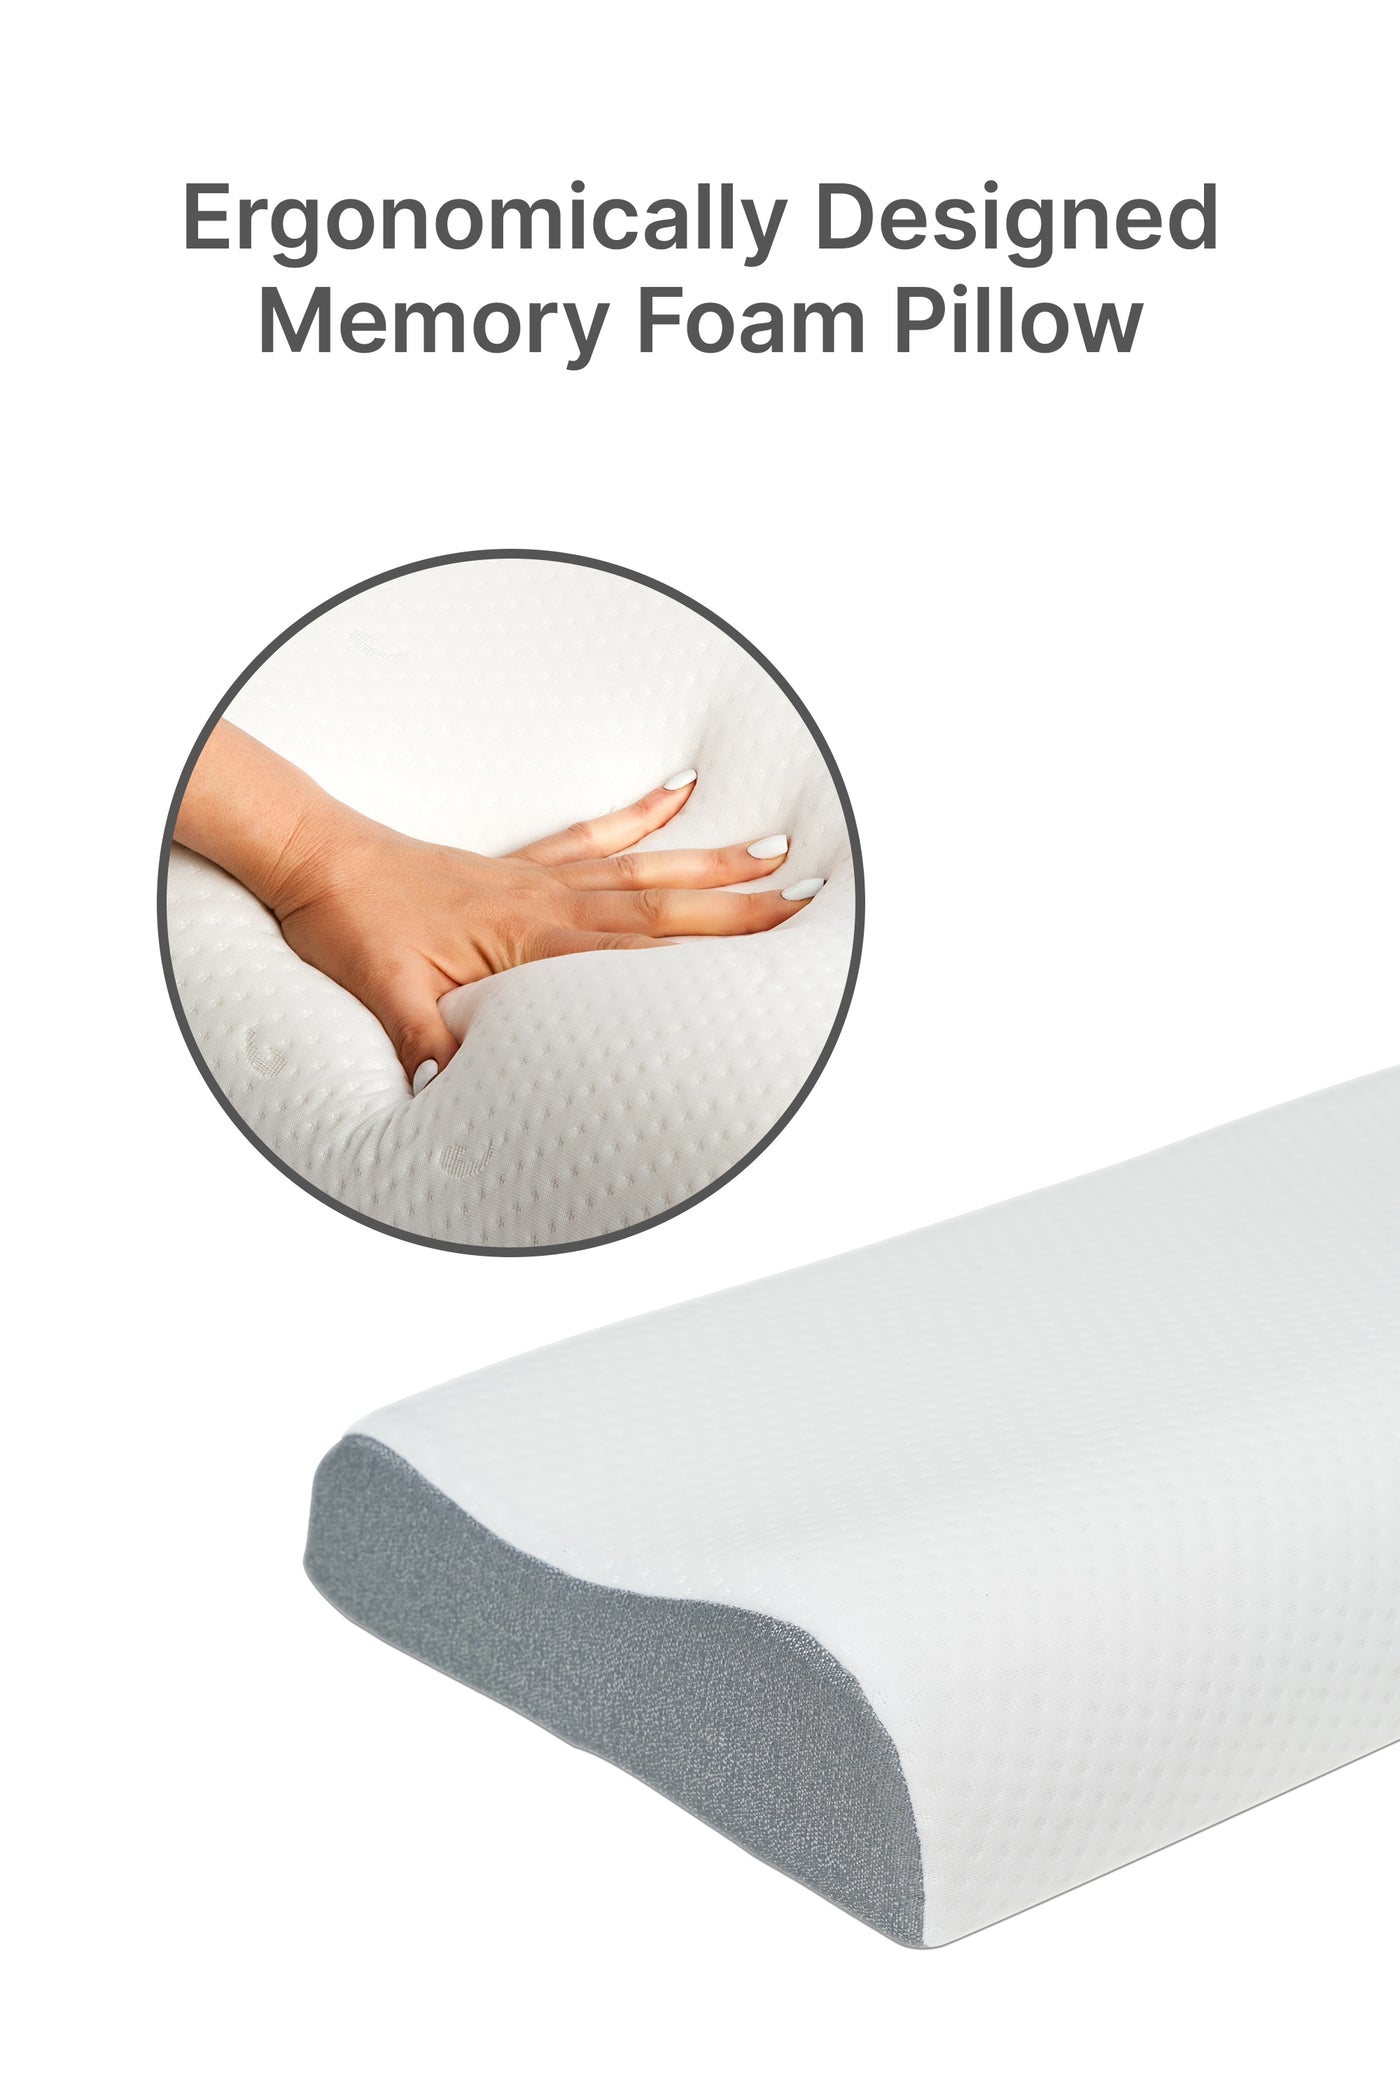 American Linen  Specialty Medical Cervical Sleeping Orthopedic Memory Foam Ergonomic Contour Pillow For Neck And Shoulder Support Pain Relief